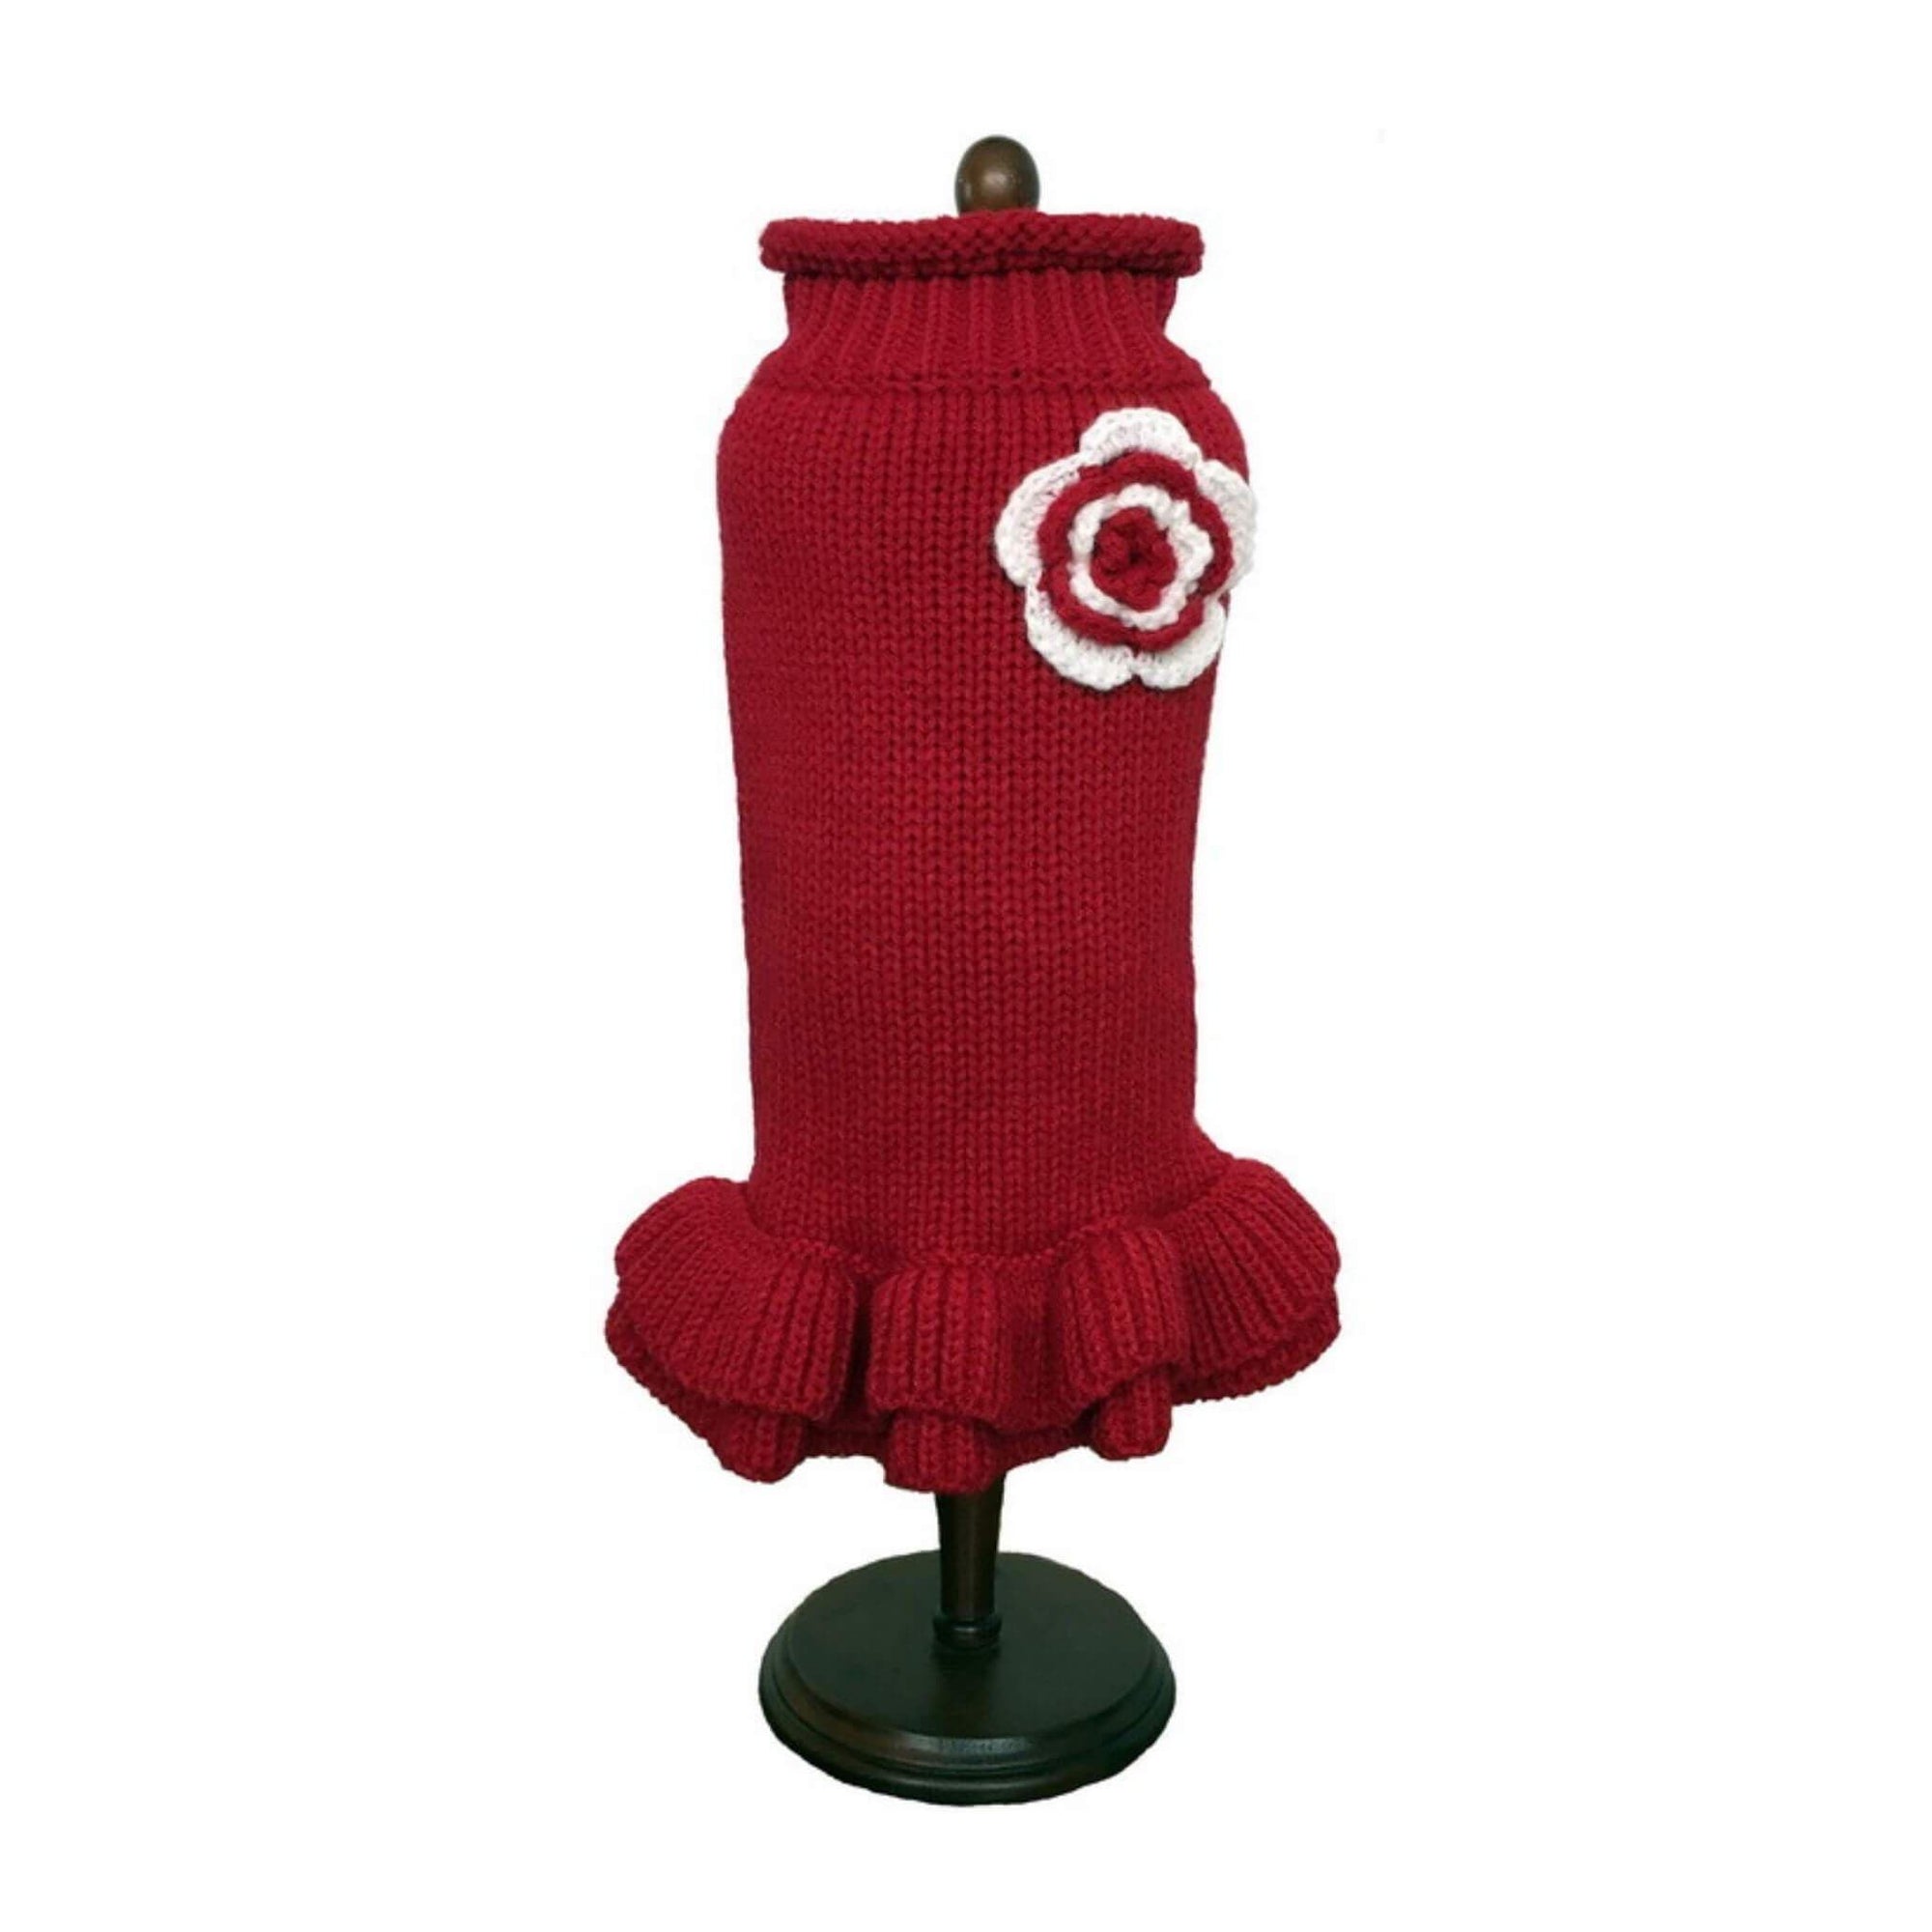 Dallas Dogs Red Dog Sweater Dress